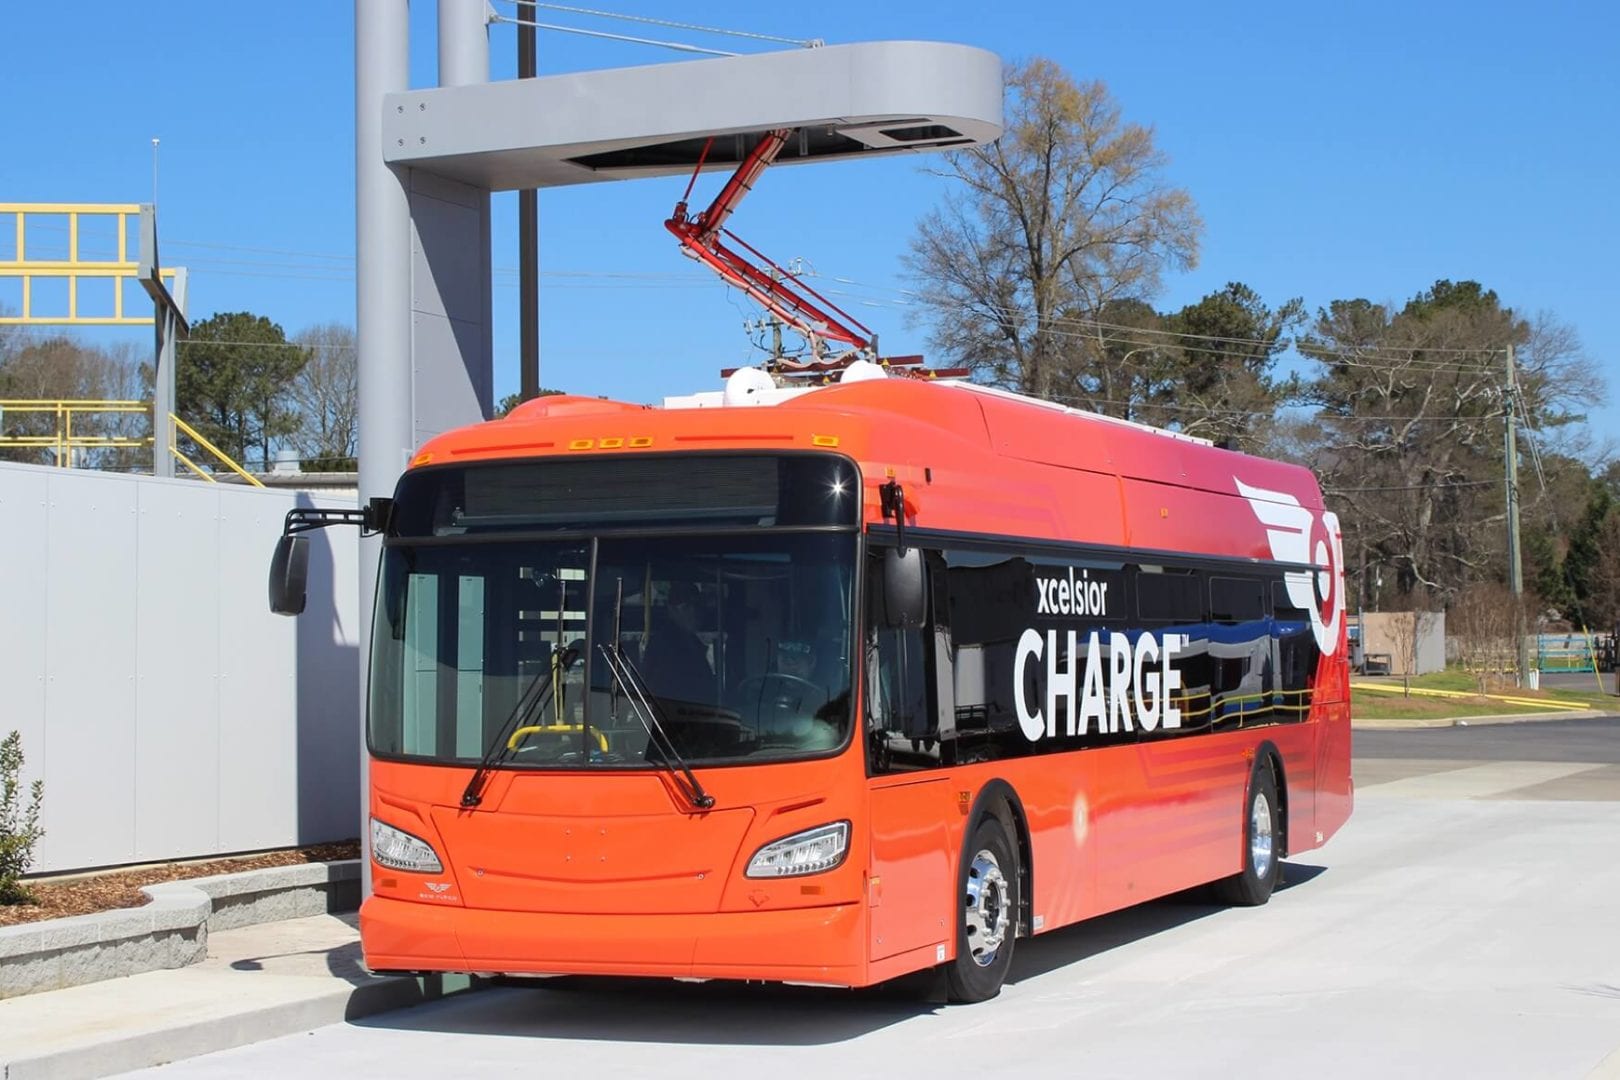 An Xcelsior CHARGE bus at a charging station